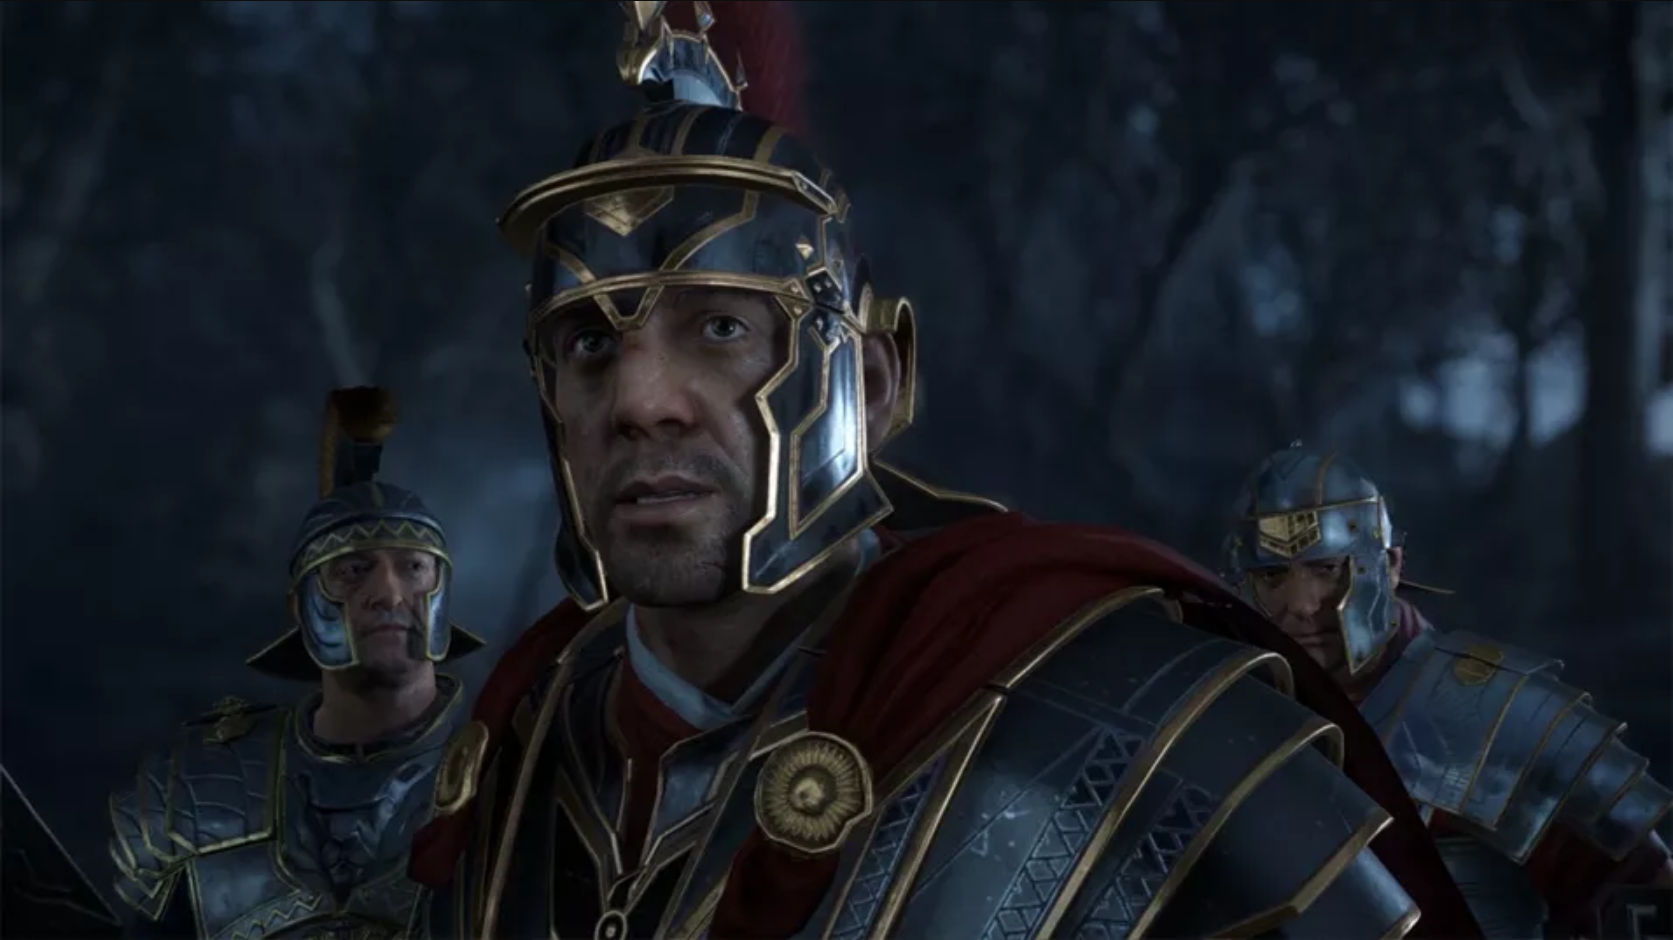 Screenshot from Ryse computer game showing a Roman soldier